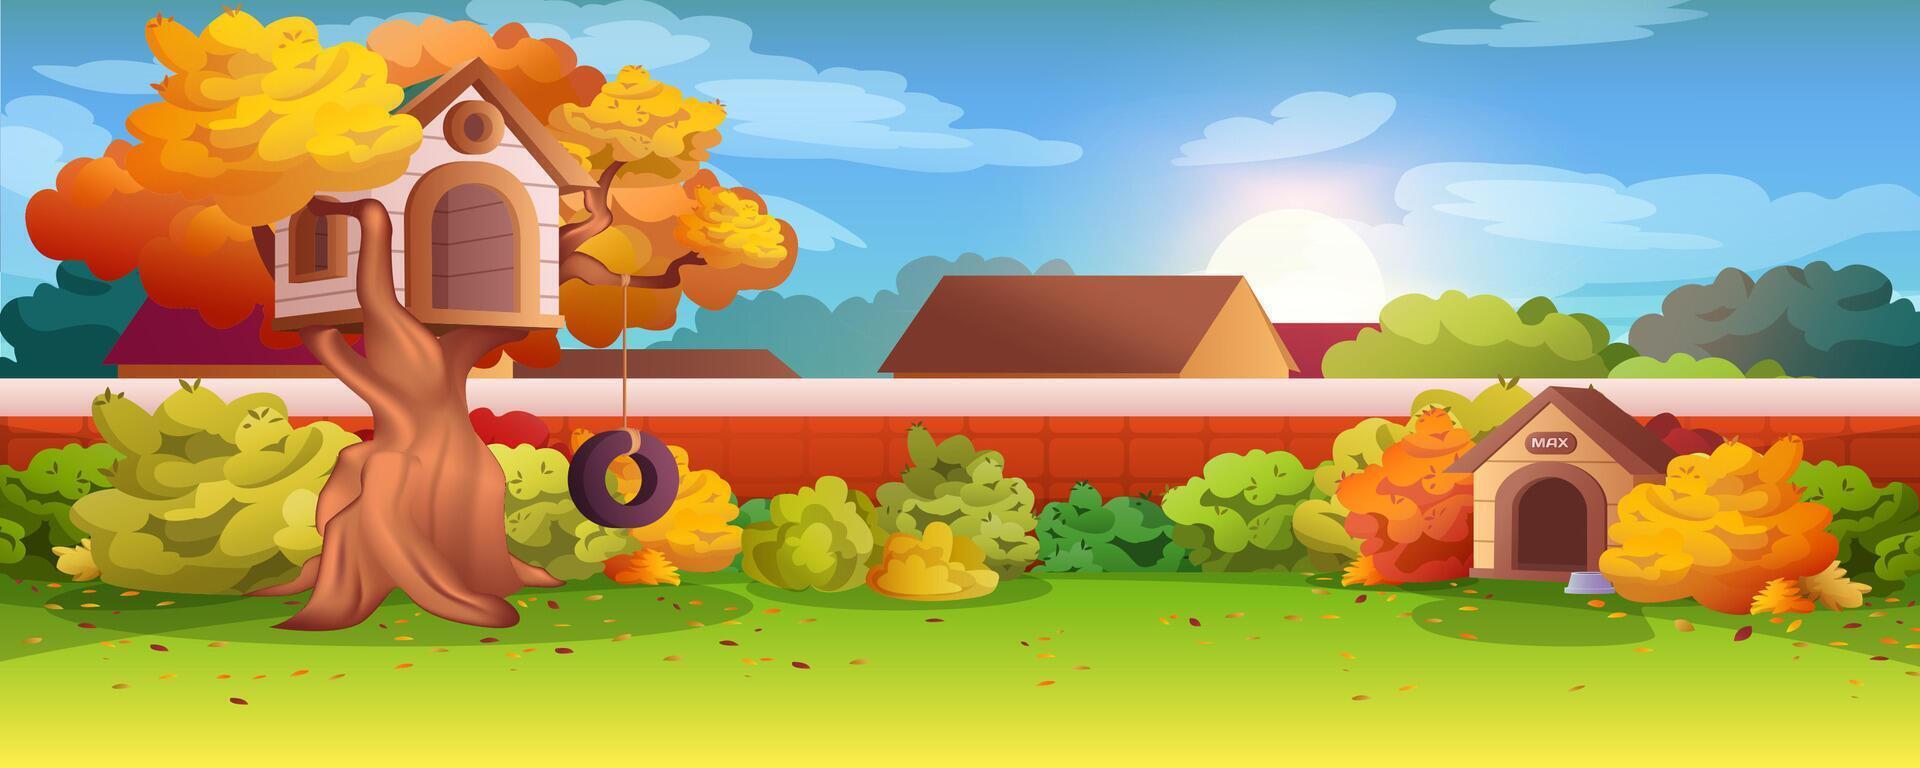 Garden backyard with brick wall, treehouse on tree, bushes and dog kennel. cartoon autumn landscape with house back yard and green lawn. Outdoor area for party or children leisure. vector